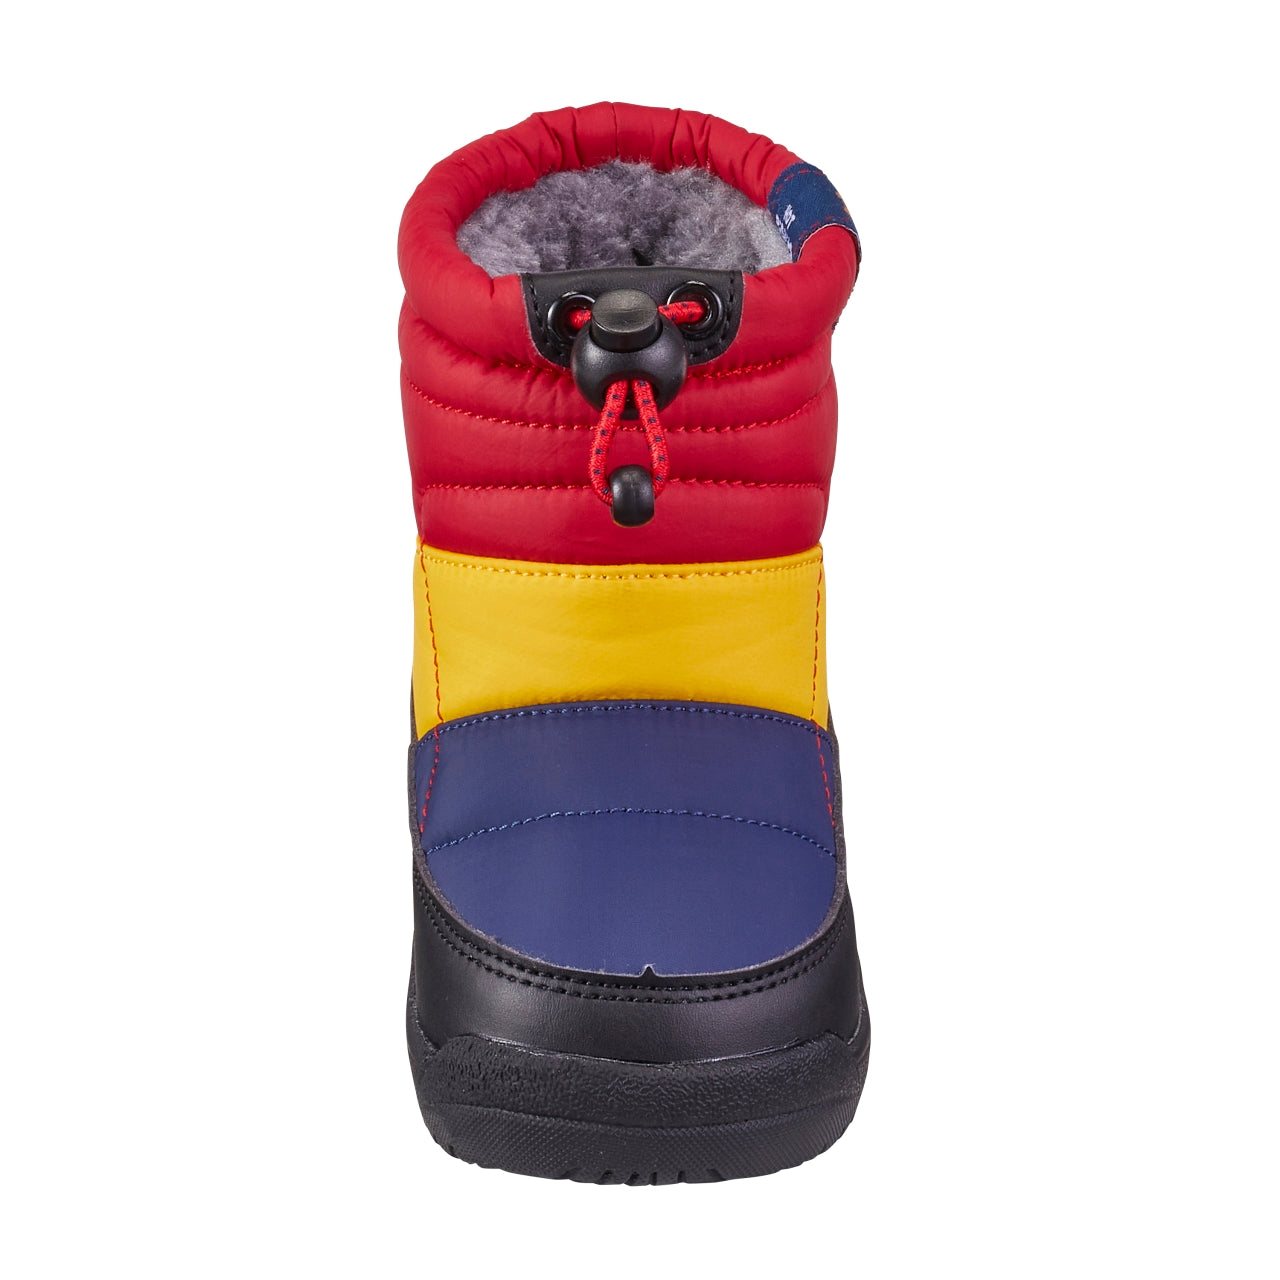 HB-Drawstring Winter Boots for Kids